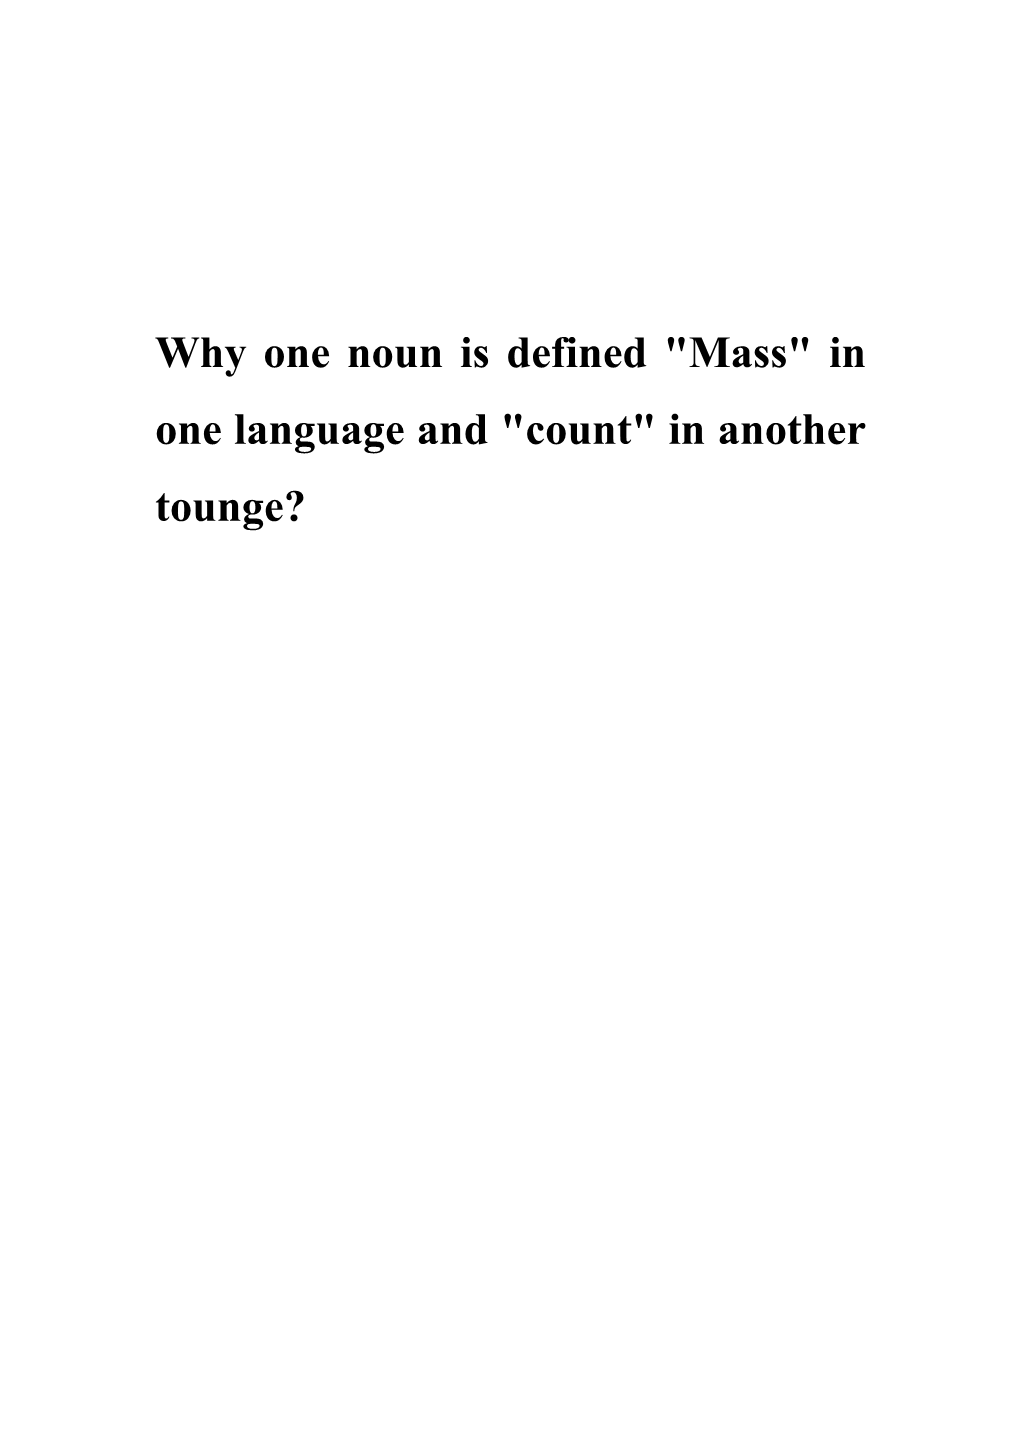 Why One Noun Is Defined Mass in One Language and Count in Another Tounge?